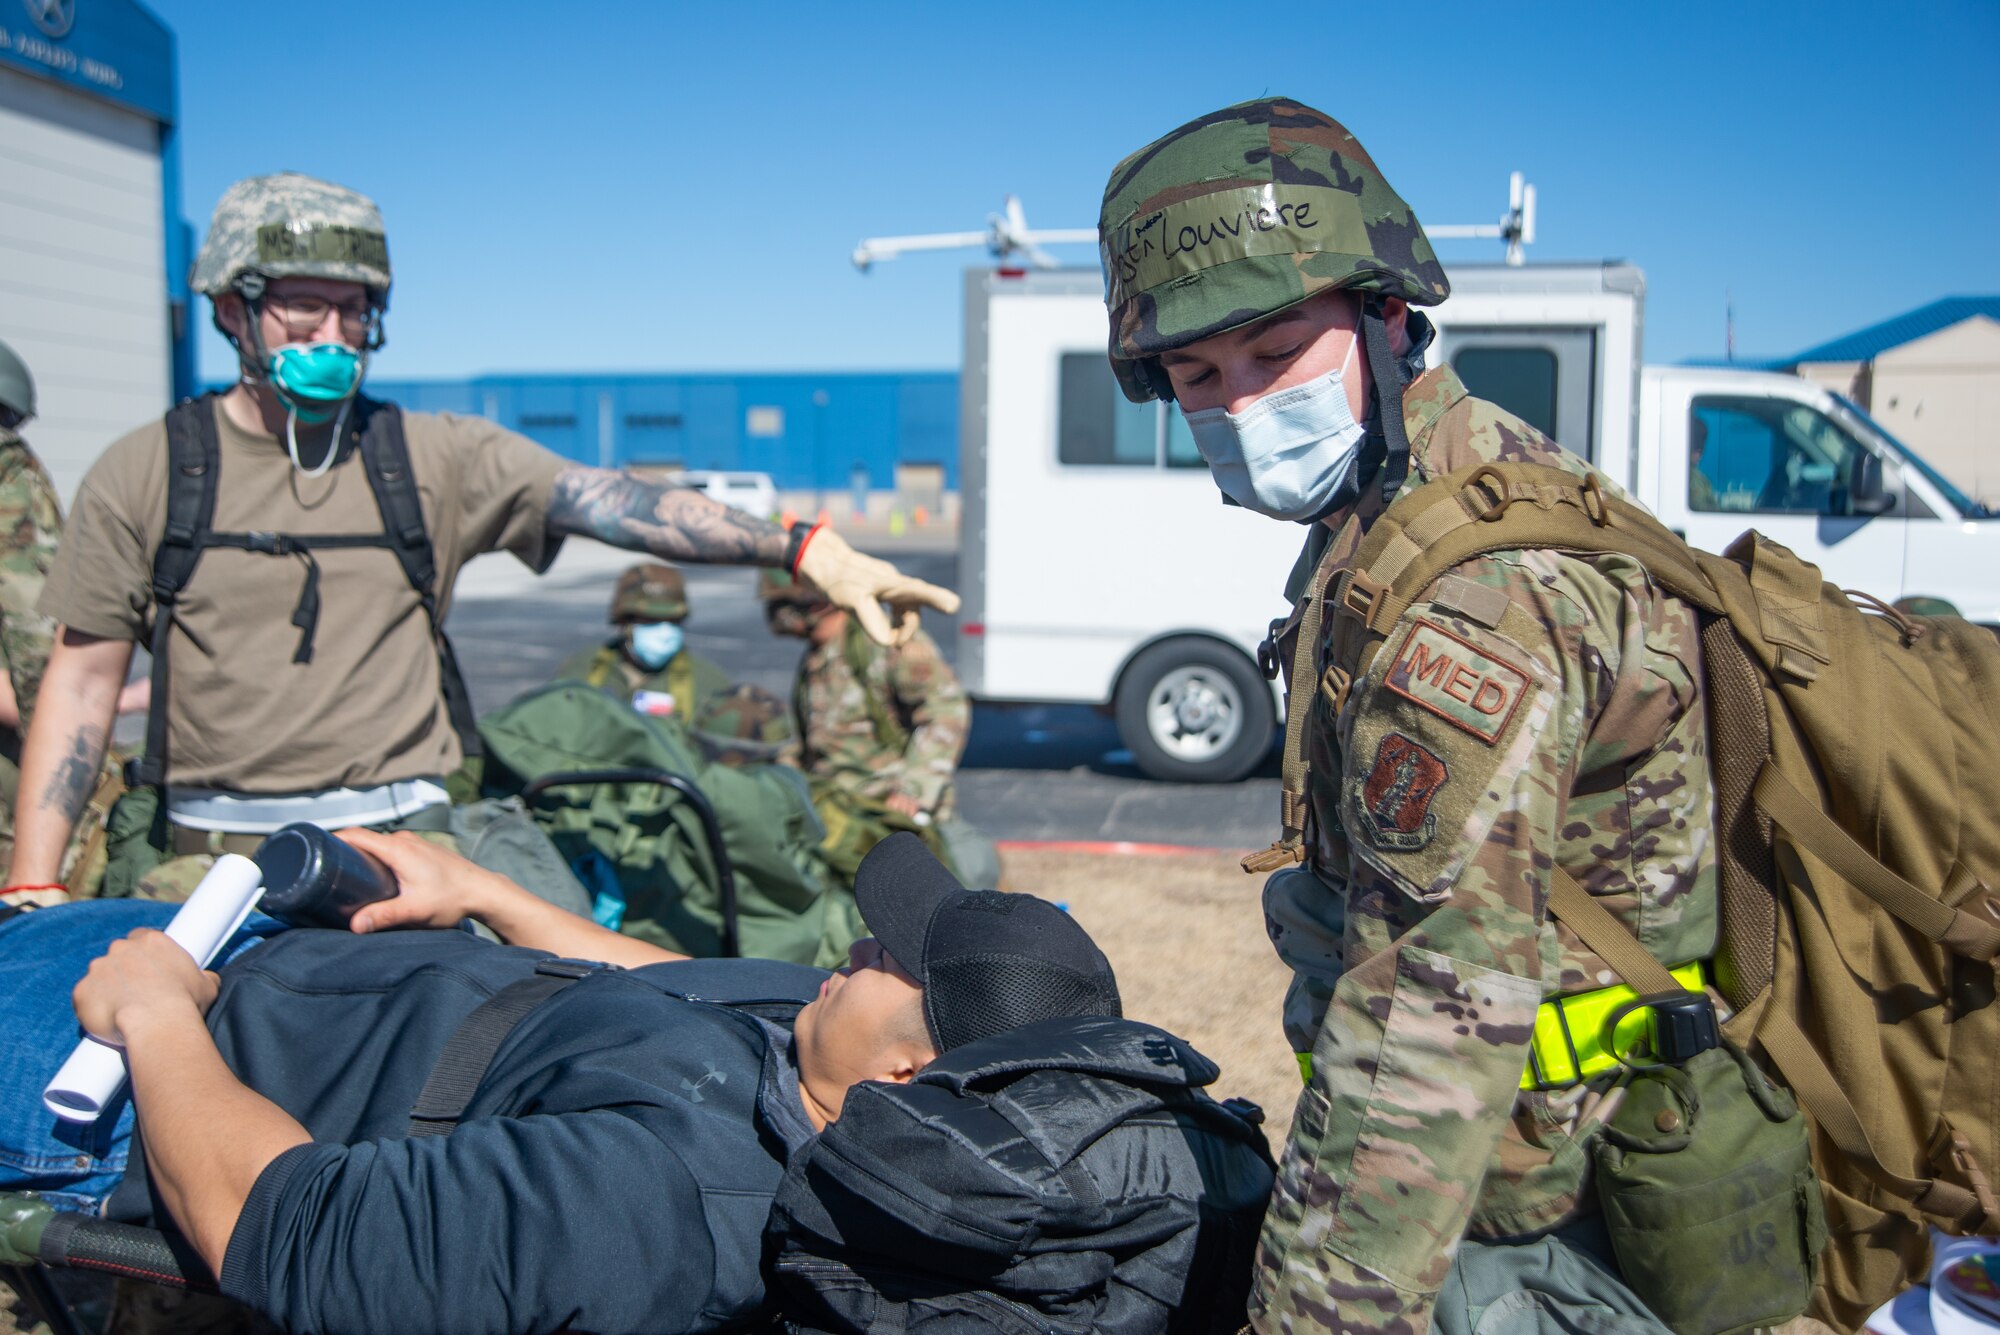 Airmen move a stretcher carrying personnel with artificial injuries into a simulated bunker.